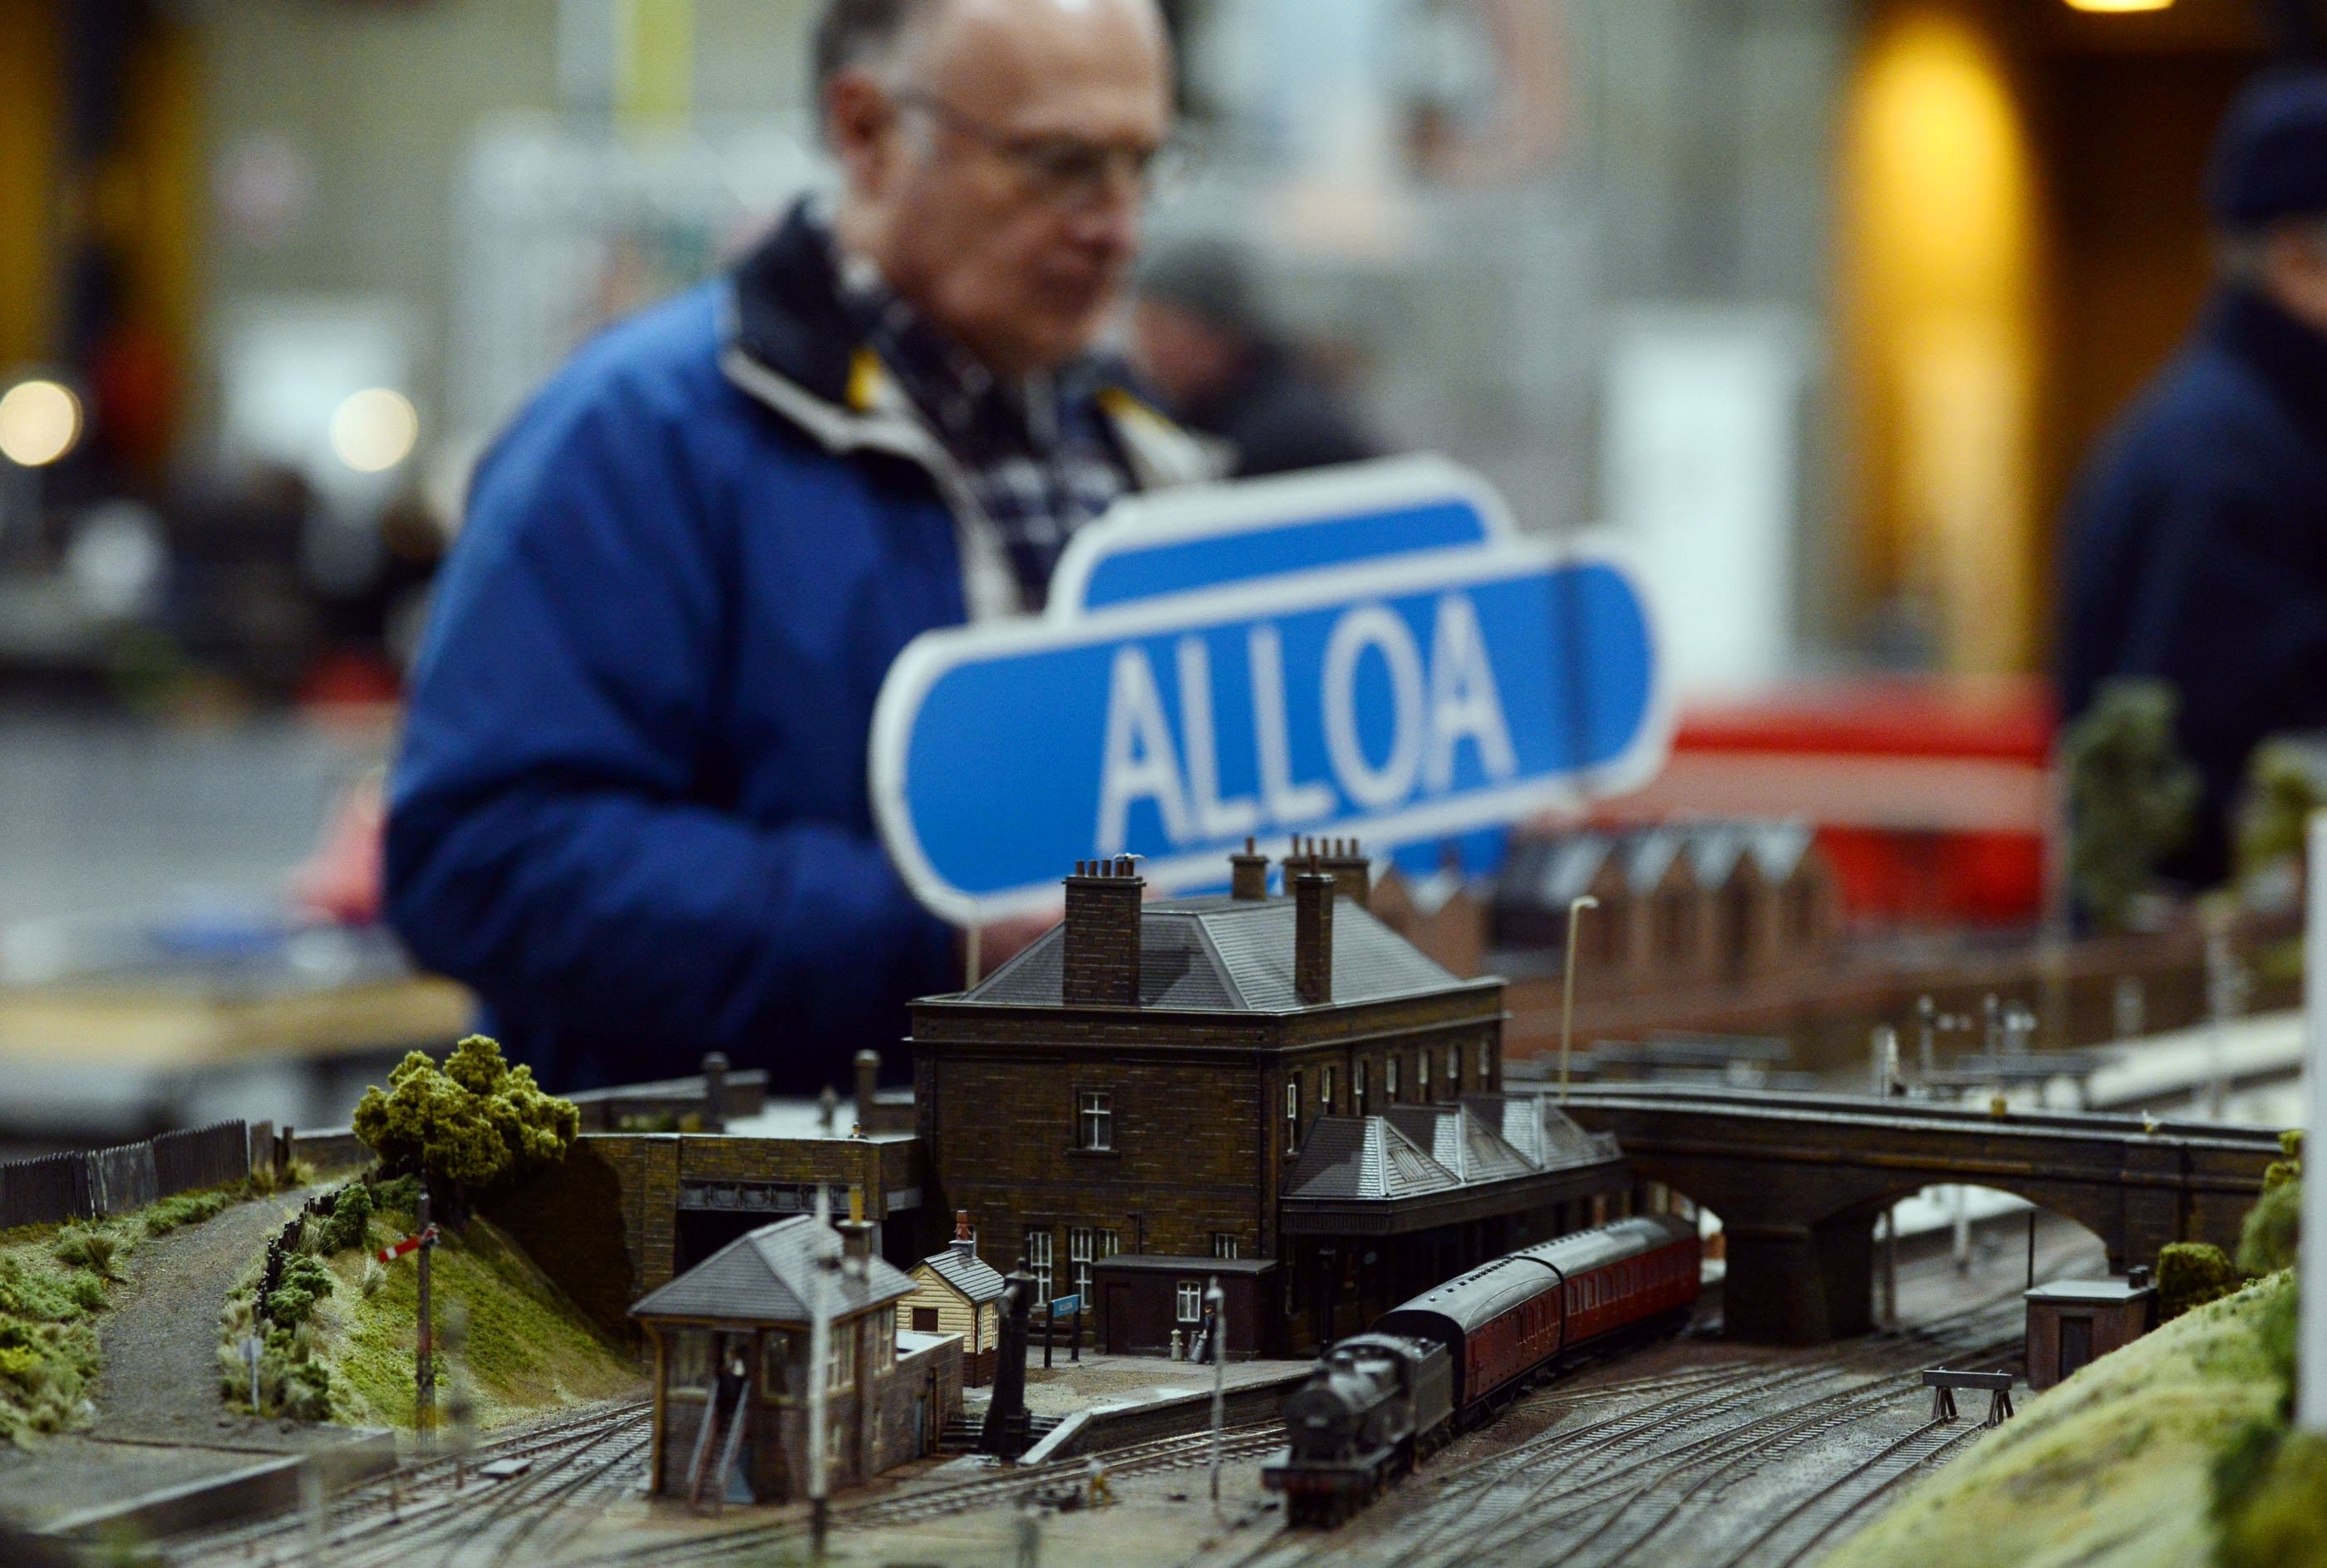 Members get their layout ready, a model of the Old Railway Station in Alloa, ahead of the 50th annual gathering of model railway enthusiasts displaying at Glasgow's SECC from tomorrow, Friday 26th to Sunday 28th Febuary, where 30 different clubs from across the UK and further are expected to display. See Centre Press story CPRAIL; Thousands of model railway enthusiasts gather for convention.